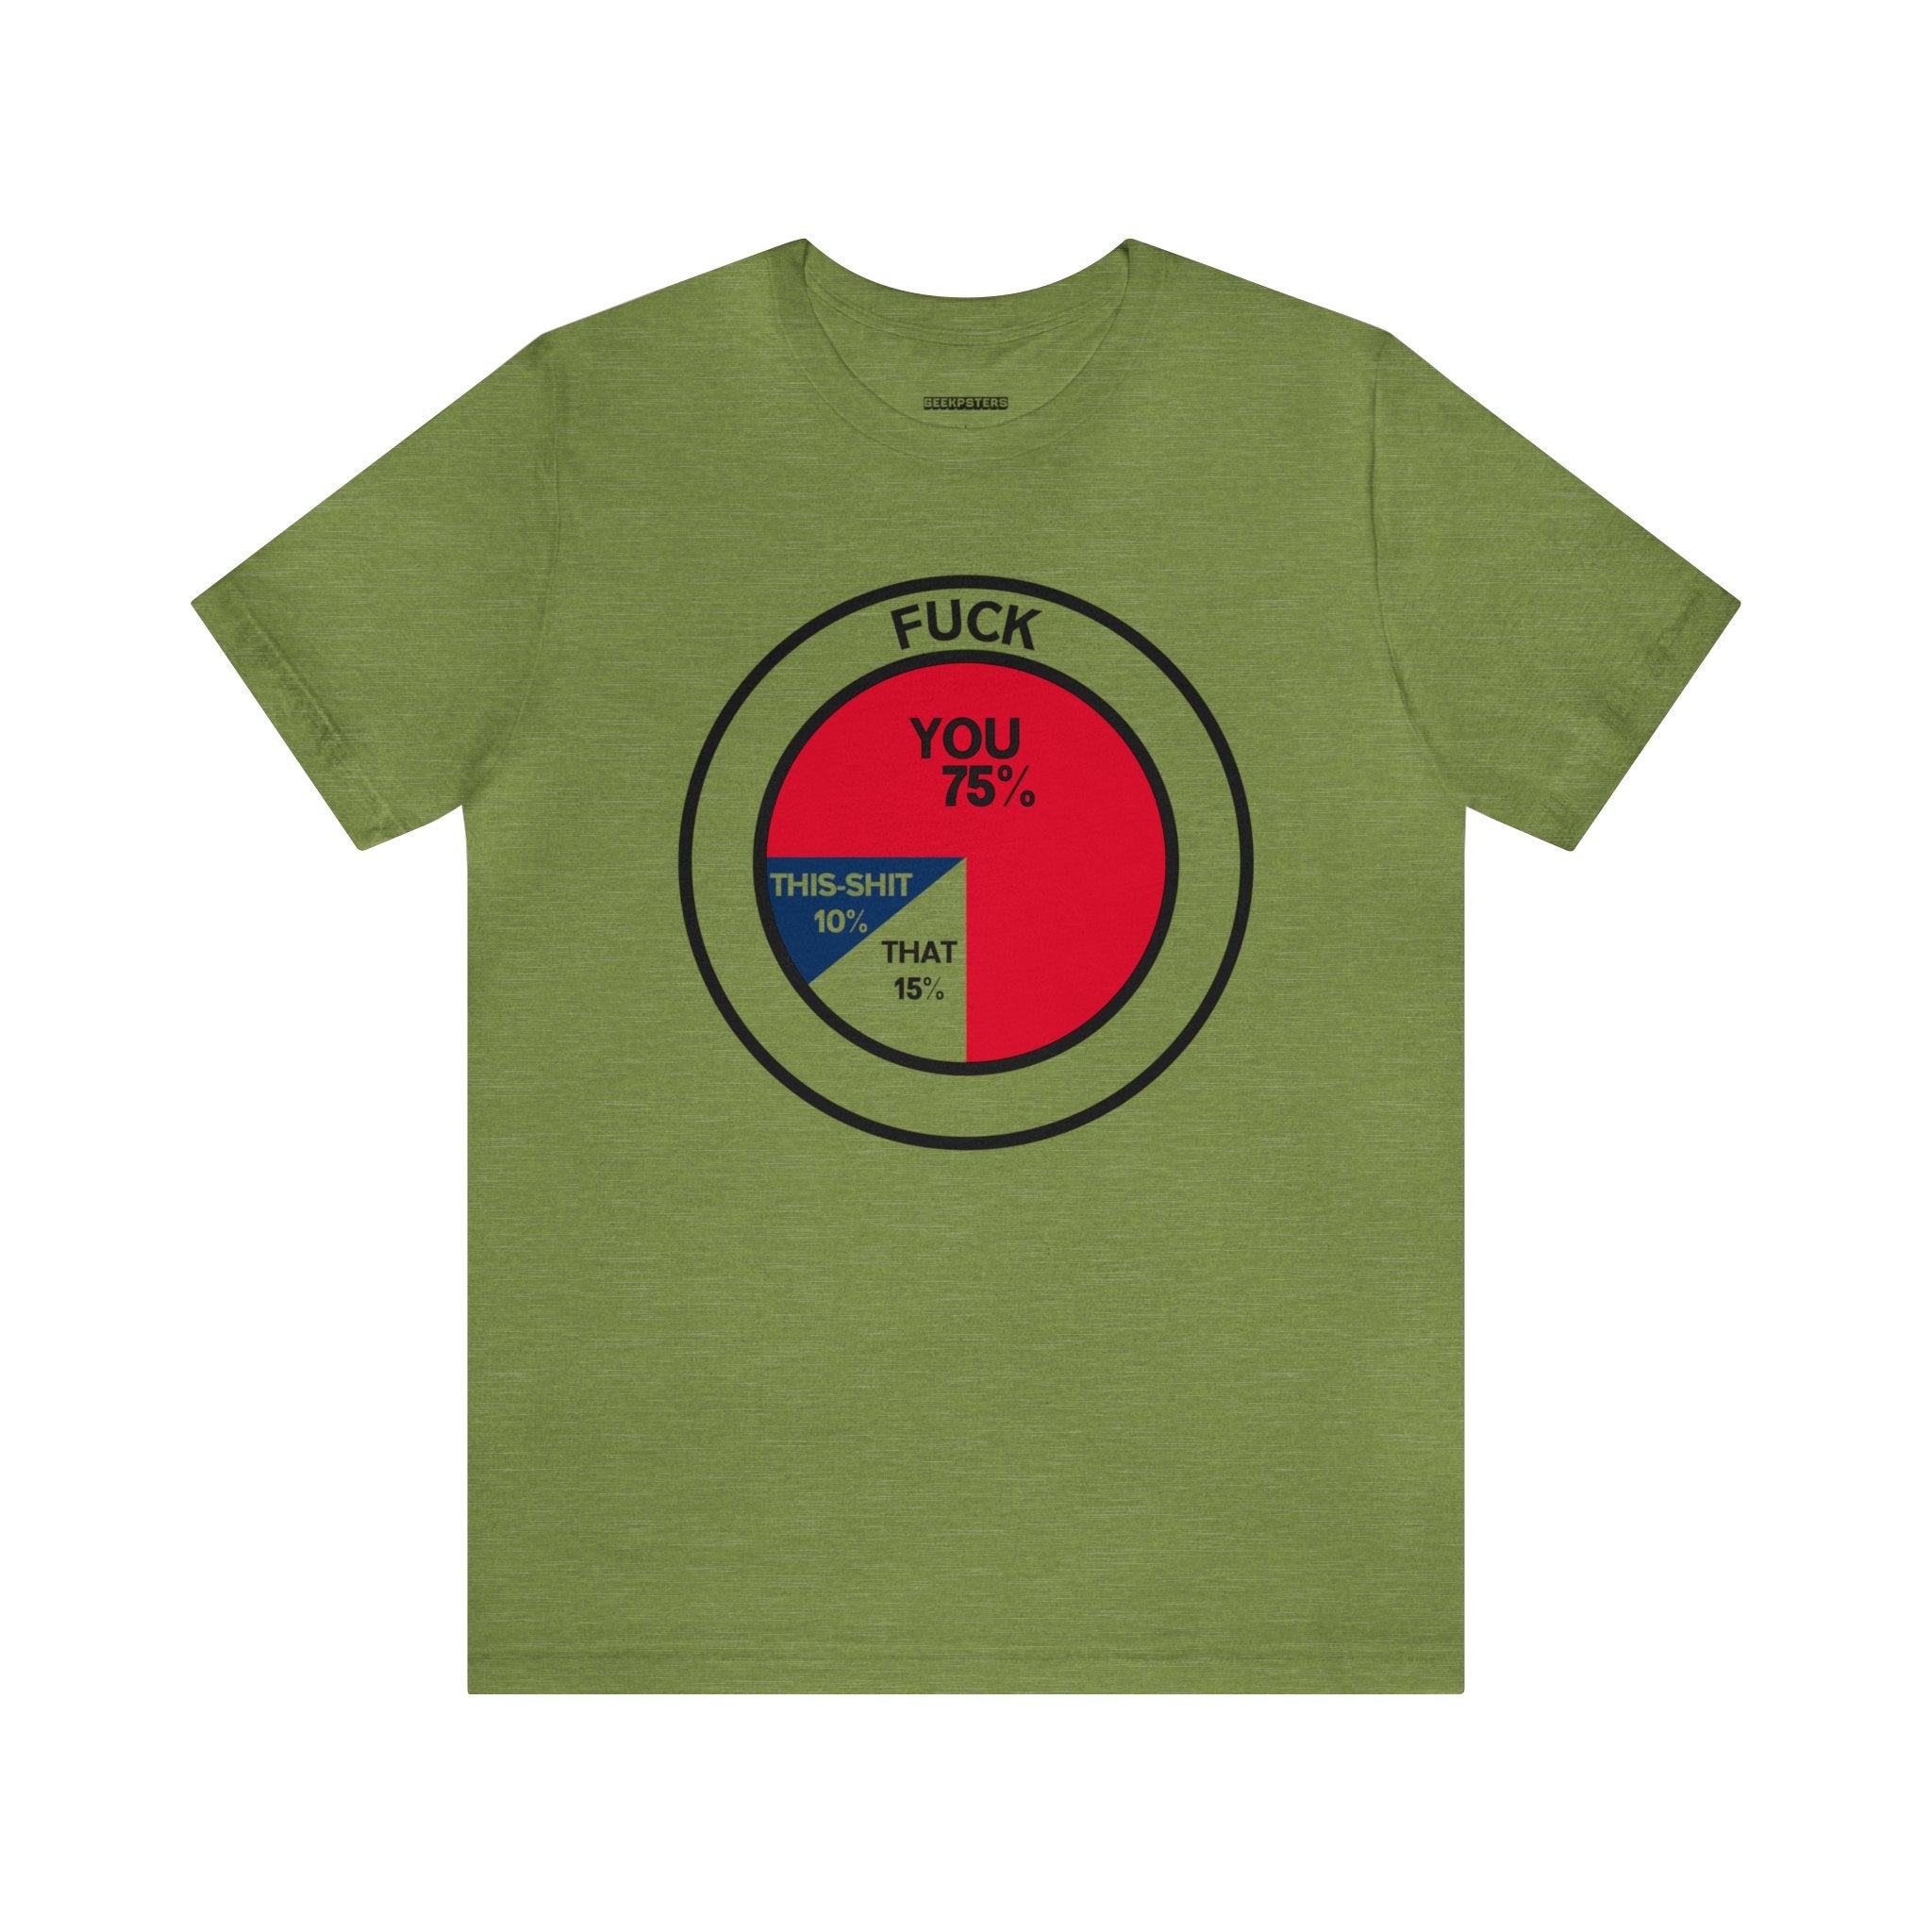 Order today: A True Statistic T-Shirt with an image of a pie chart.